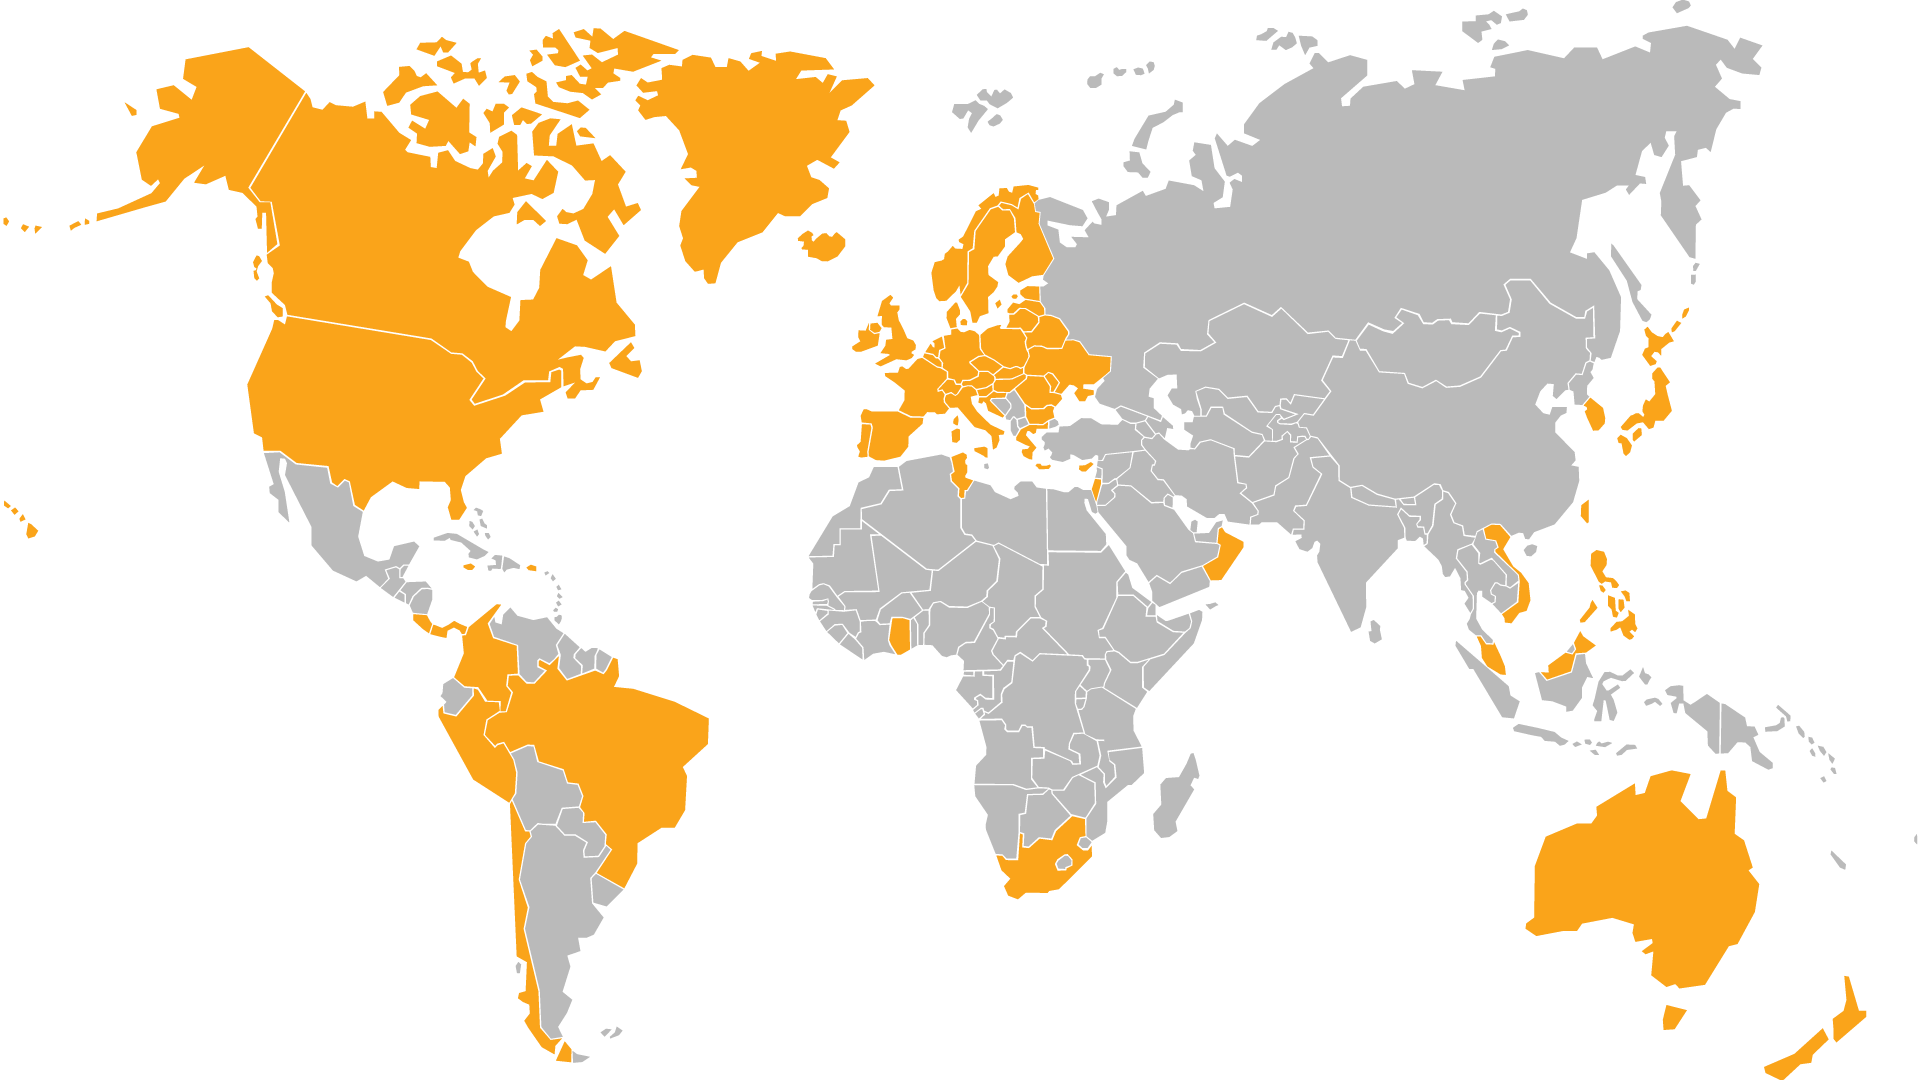 A world map highlighting the over 60 countries that System76 ships to.